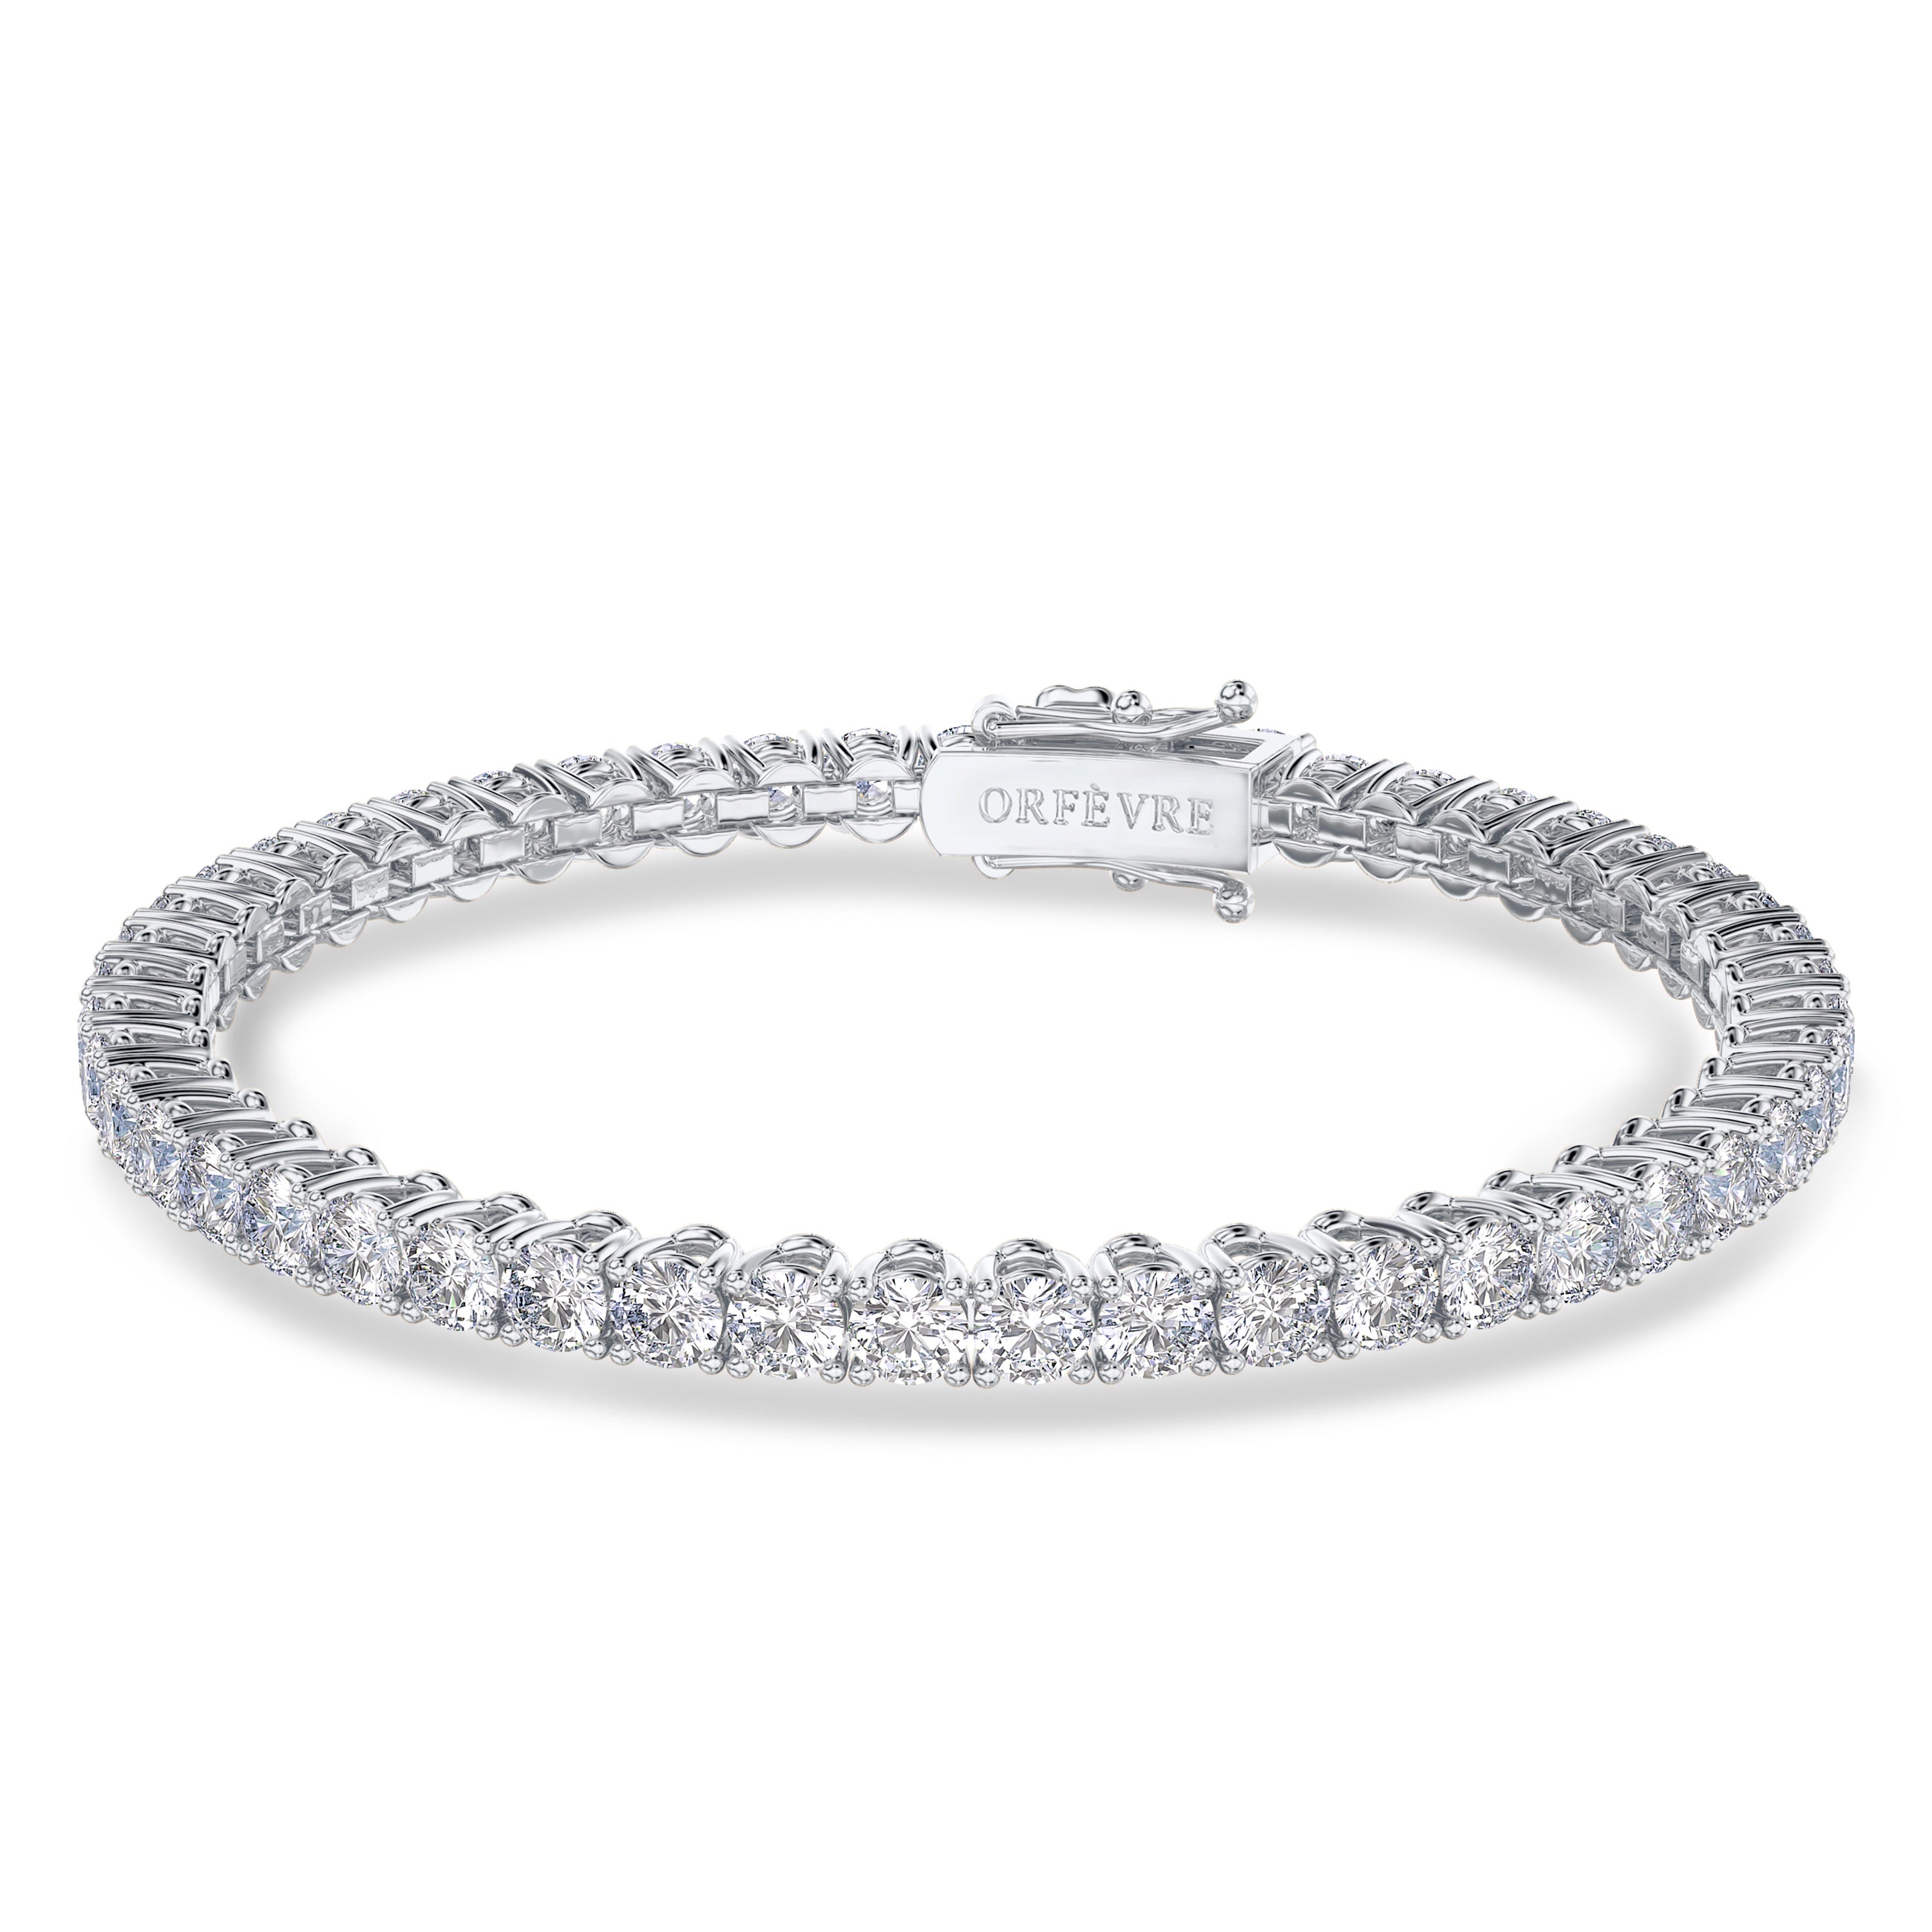 10.32 carat tennis bracelet in 18k gold, FG color and SI clarity